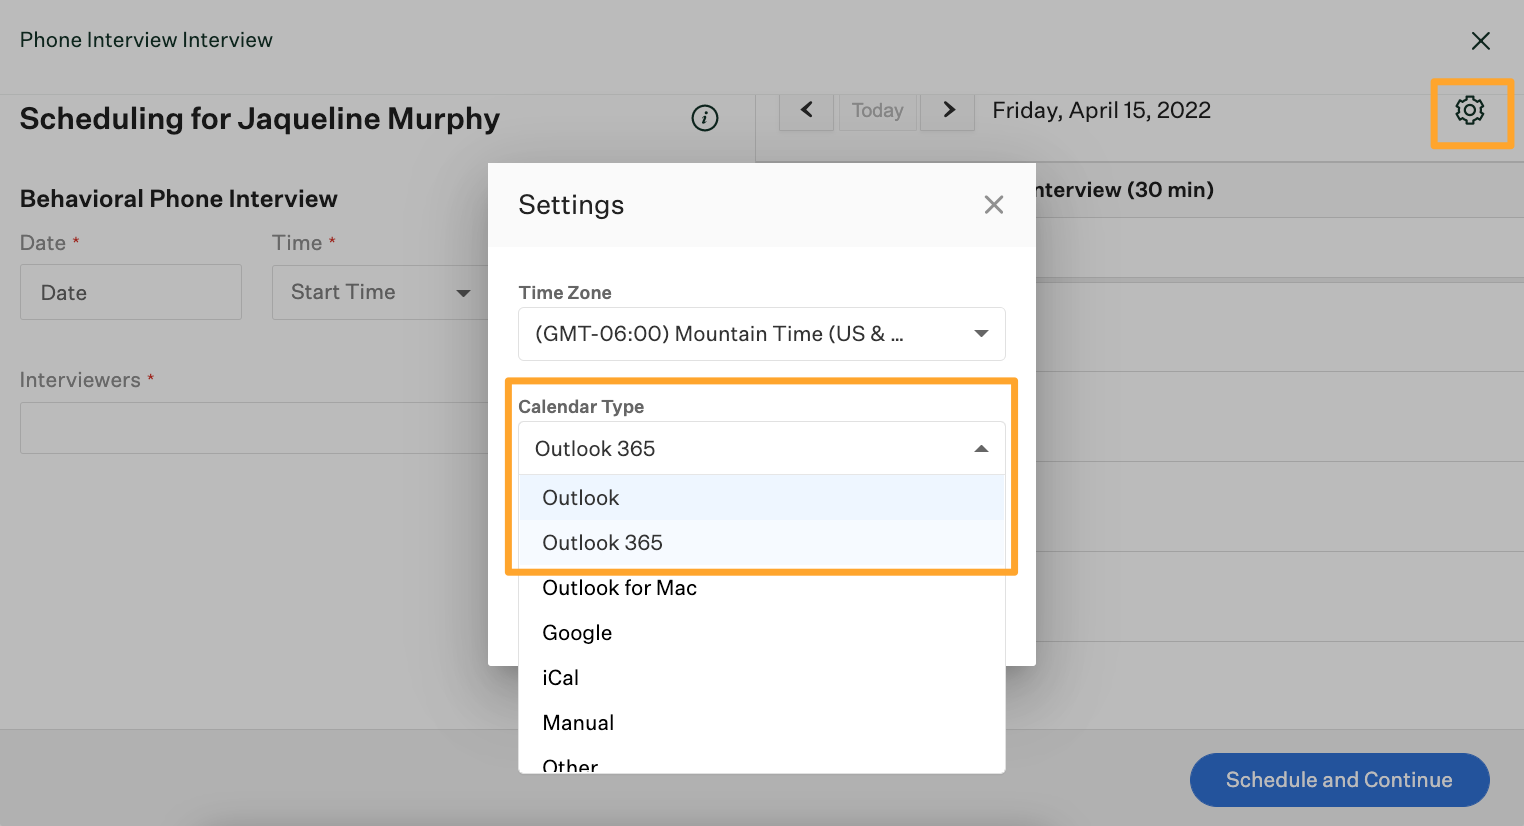 An example calendar settings is shown with a calendar selected for Outlook 365